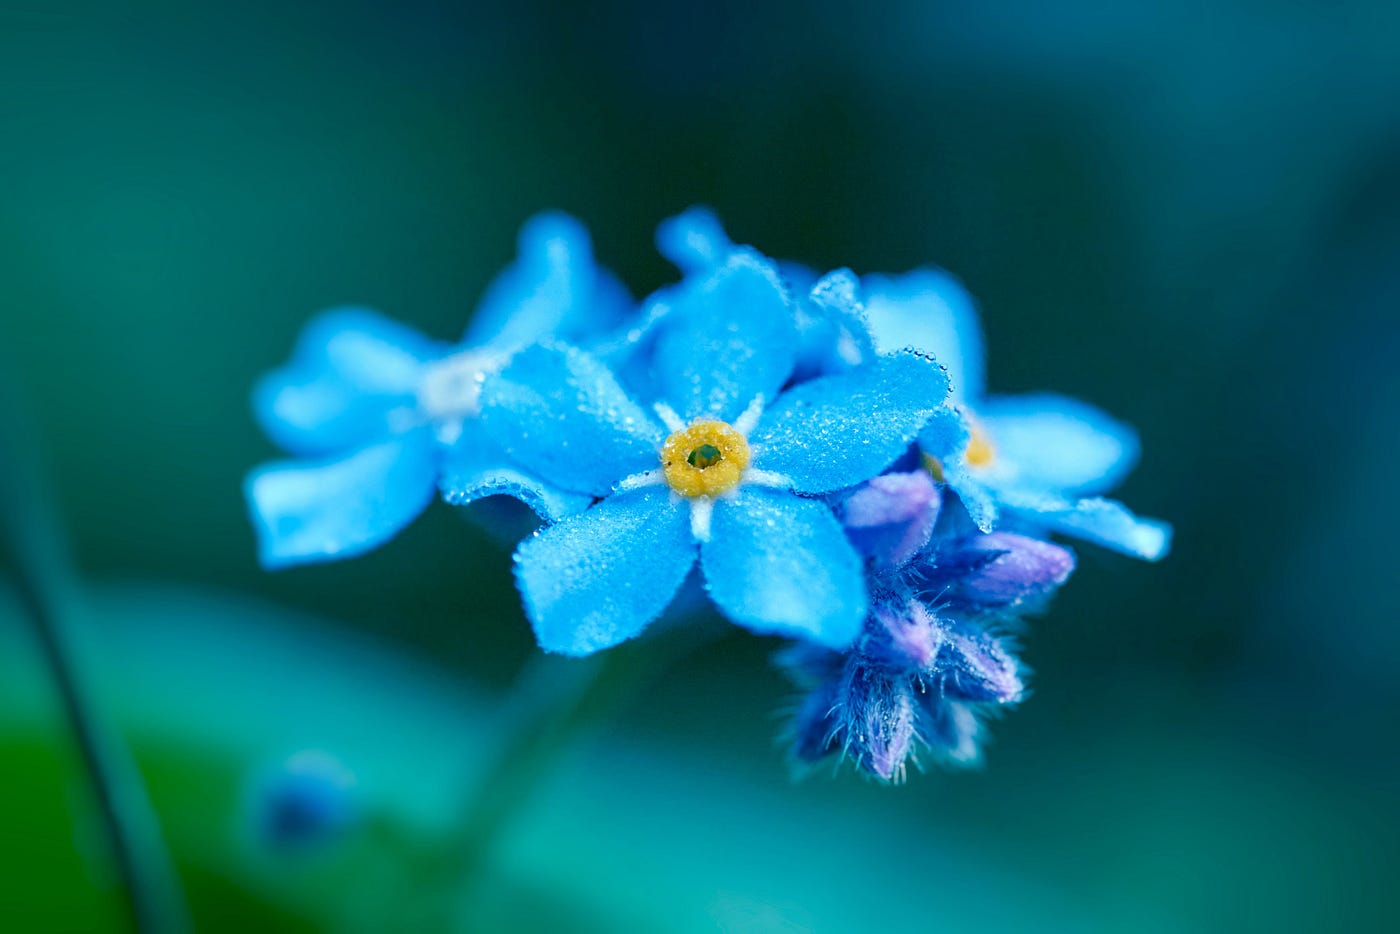 Forget-Me-Not Flowers: Their Meaning and Symbolism, by Raul Cornelius